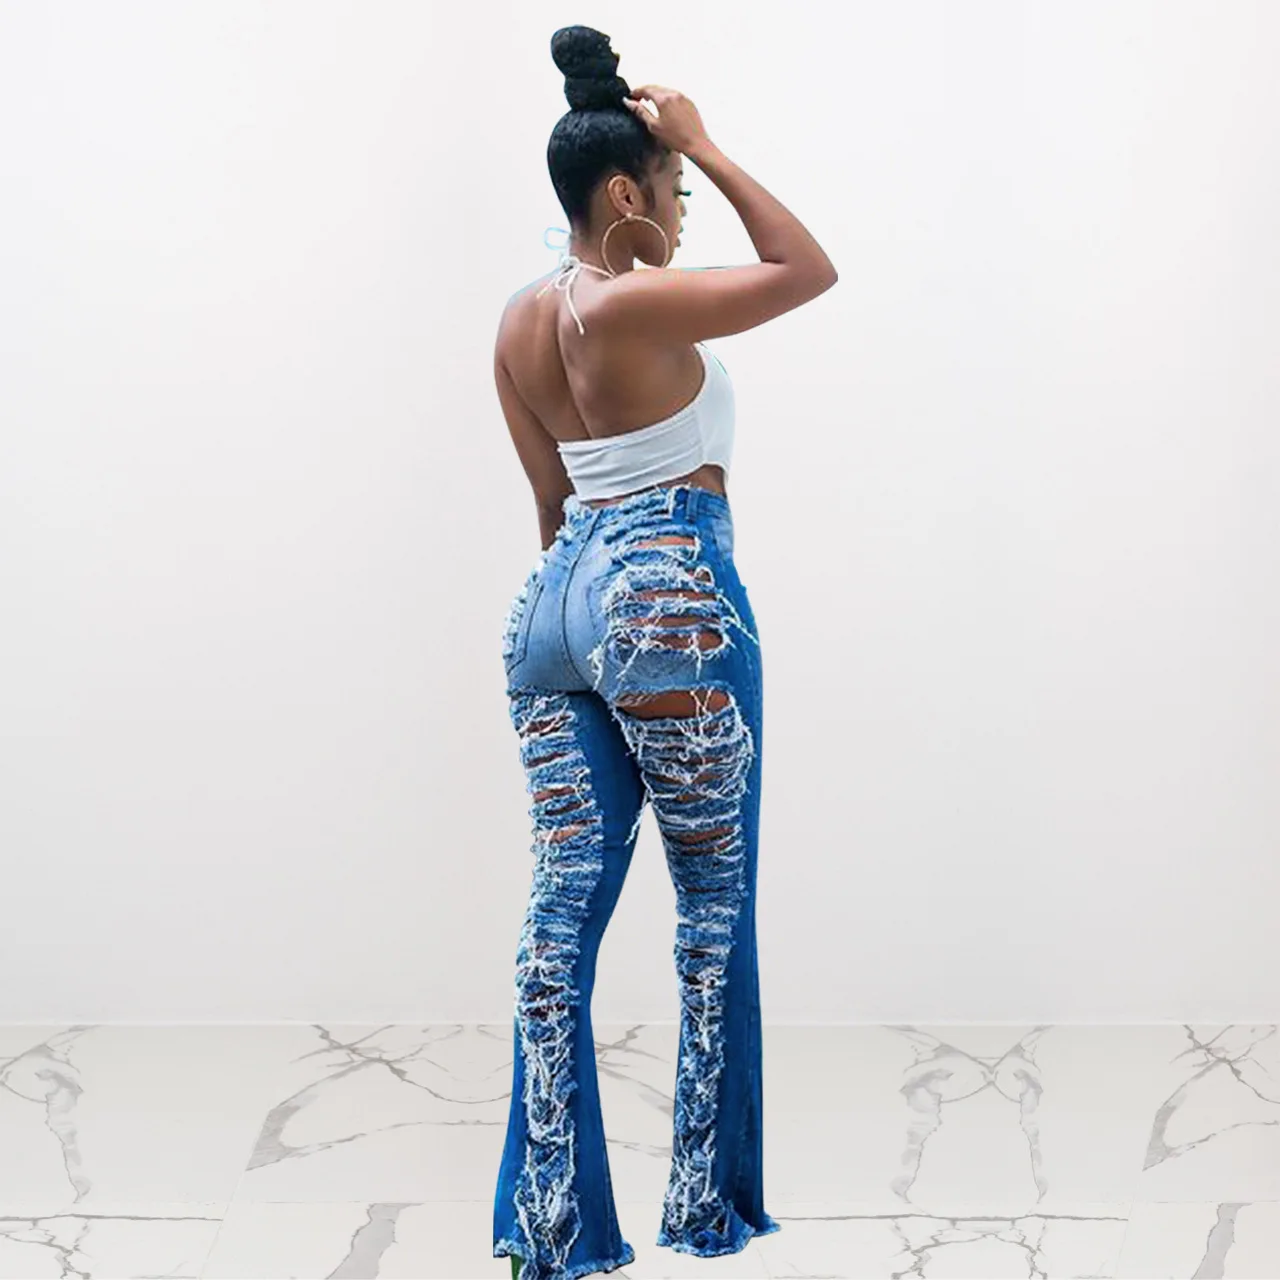 

2022 Spring New fashion Women's Trousers out flare jean Wide leg pants Loose Rise Zipper sexy ripped stretch denim jeans, Blue